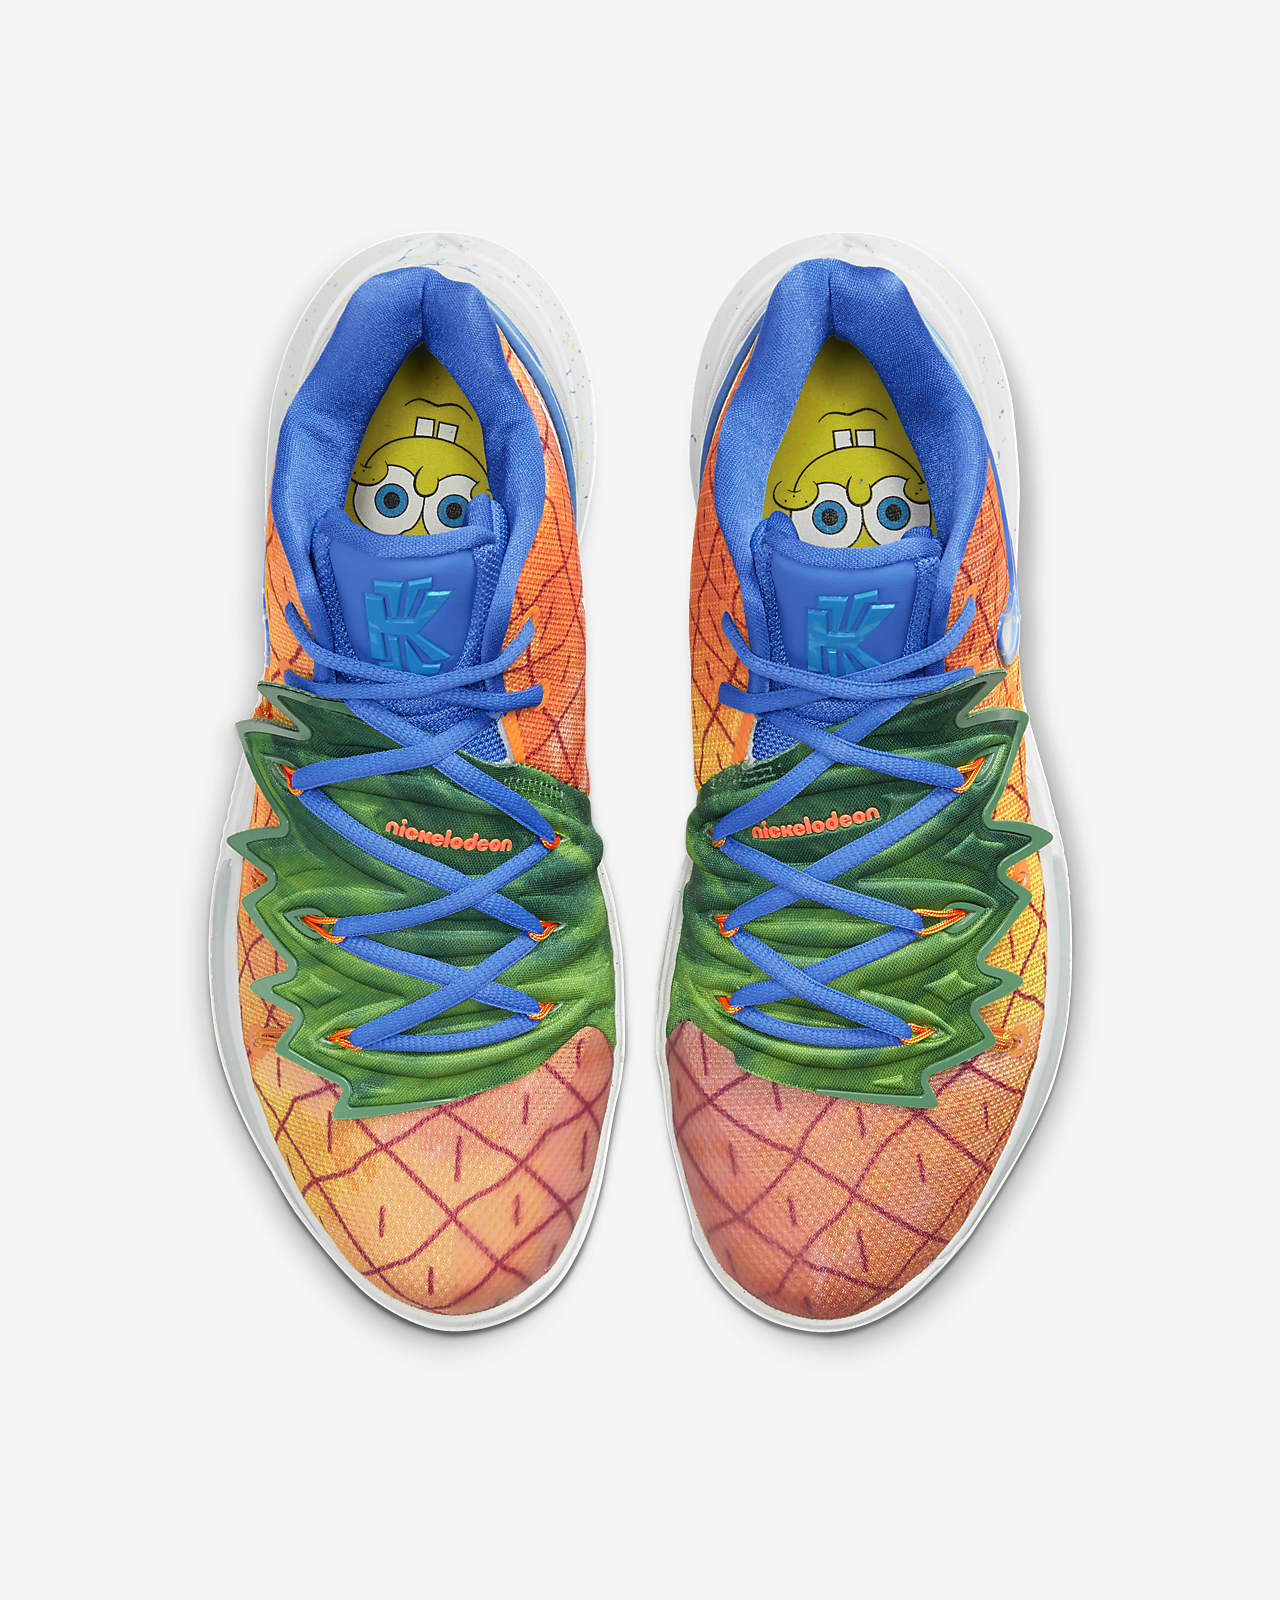 Buy two get one free Nike Kyrie 5 EP 5th UFO Alien Blue Green Irving